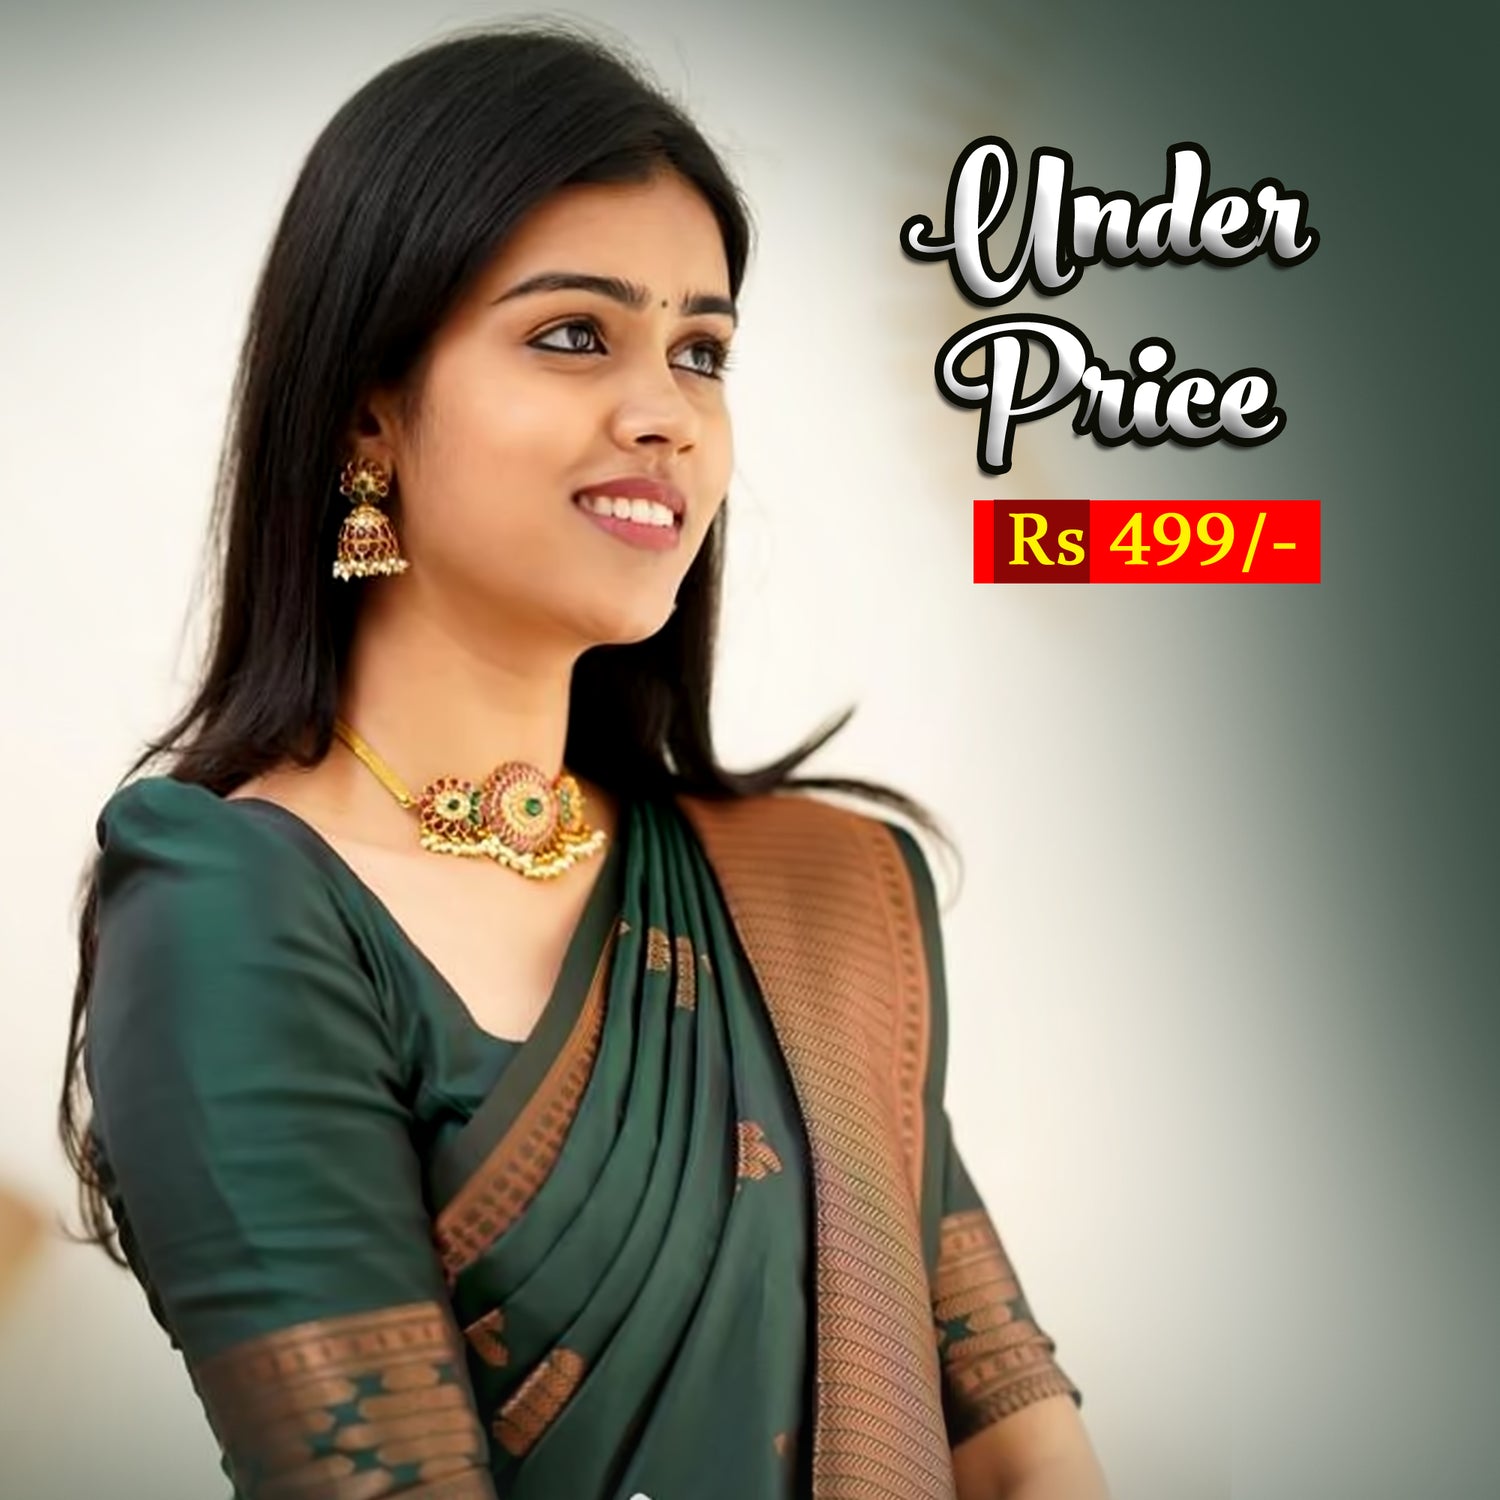 Under Rs.499/-